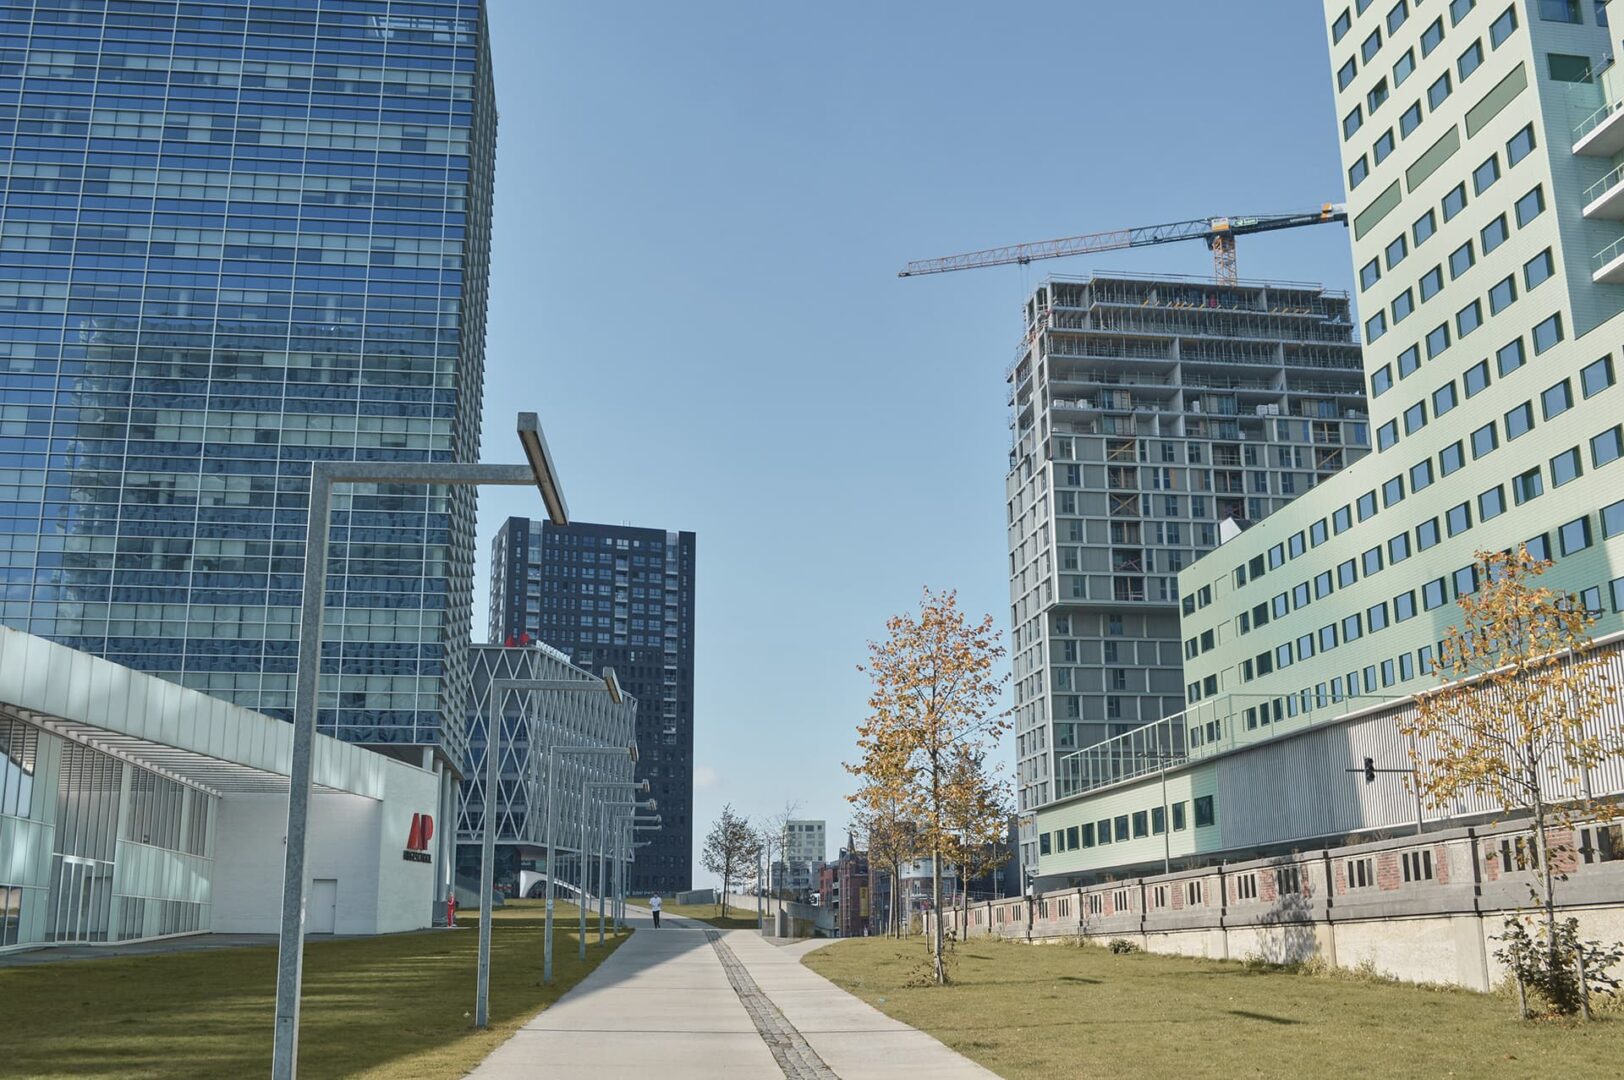 Walking path between tall glass city buildings